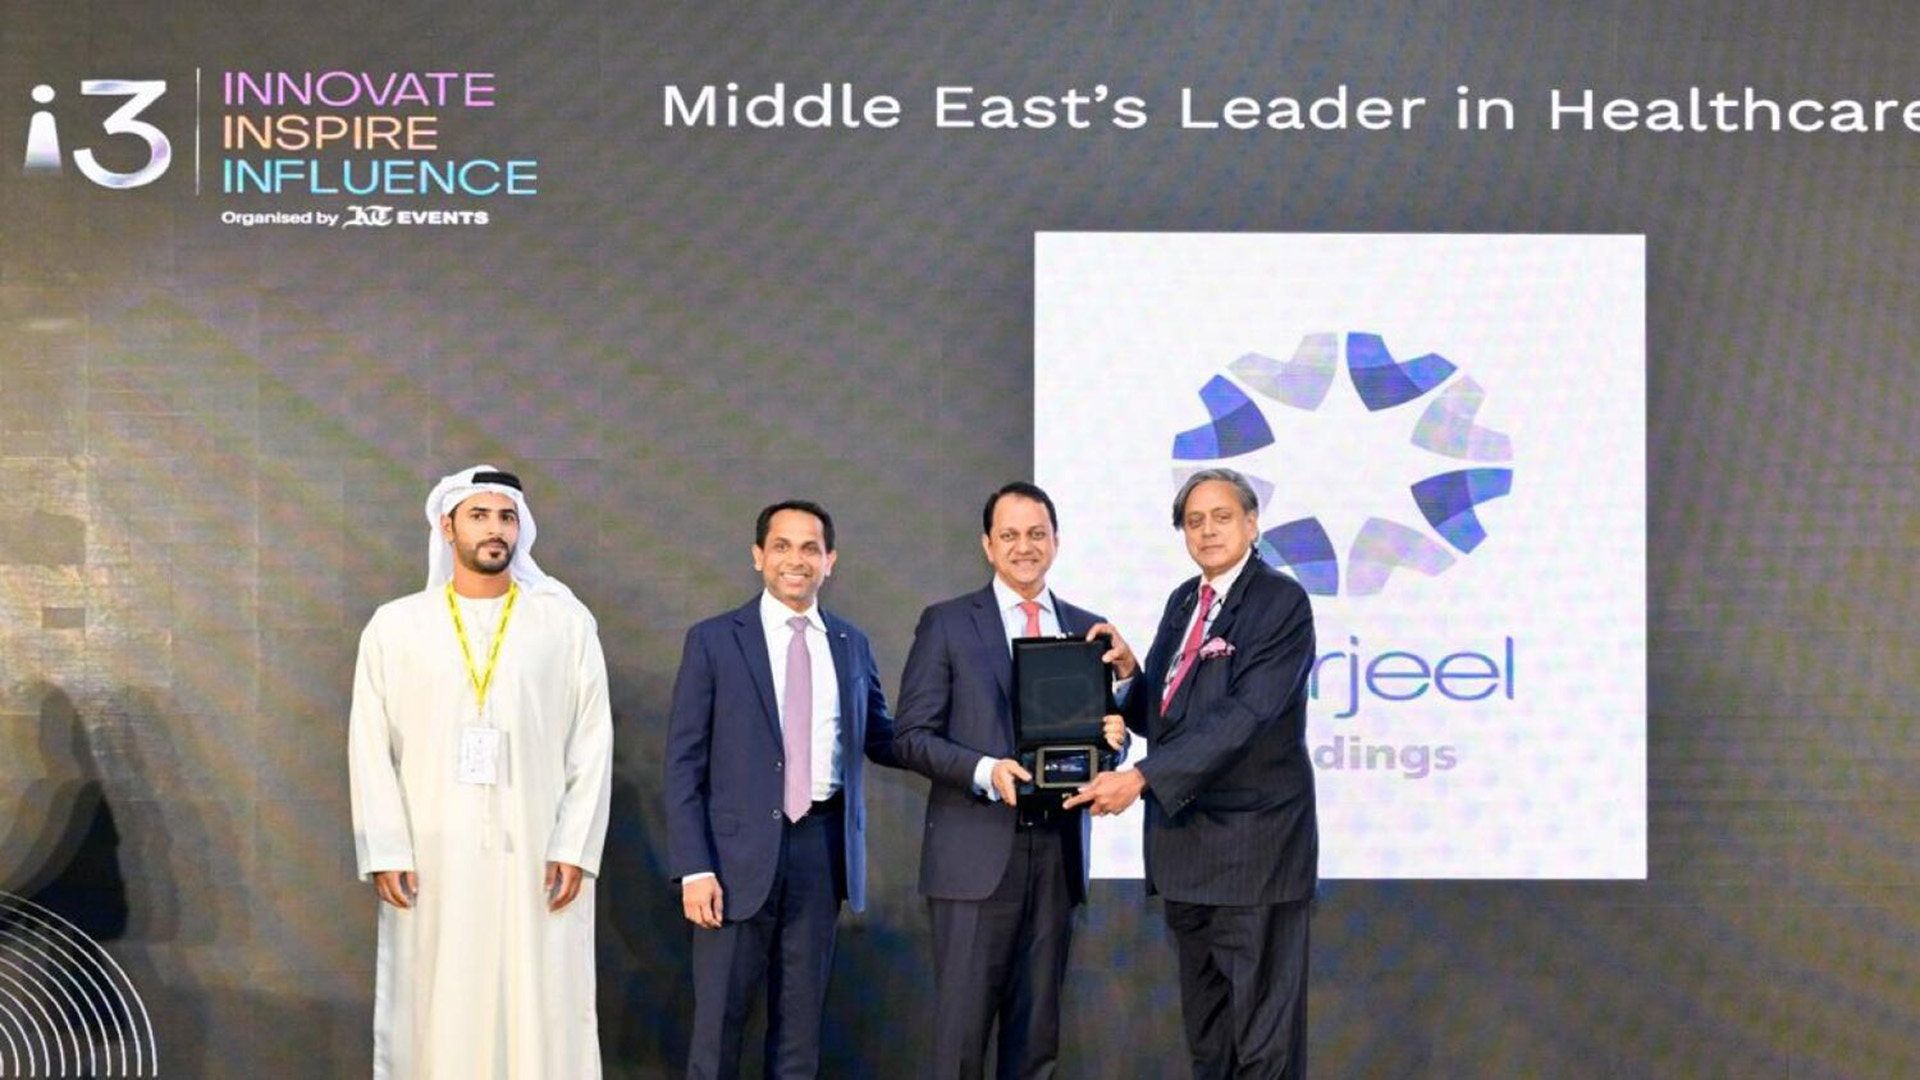 Burjeel Holdings Recognized as Middle East’s Leader in Healthcare Excellence by Khaleej Times